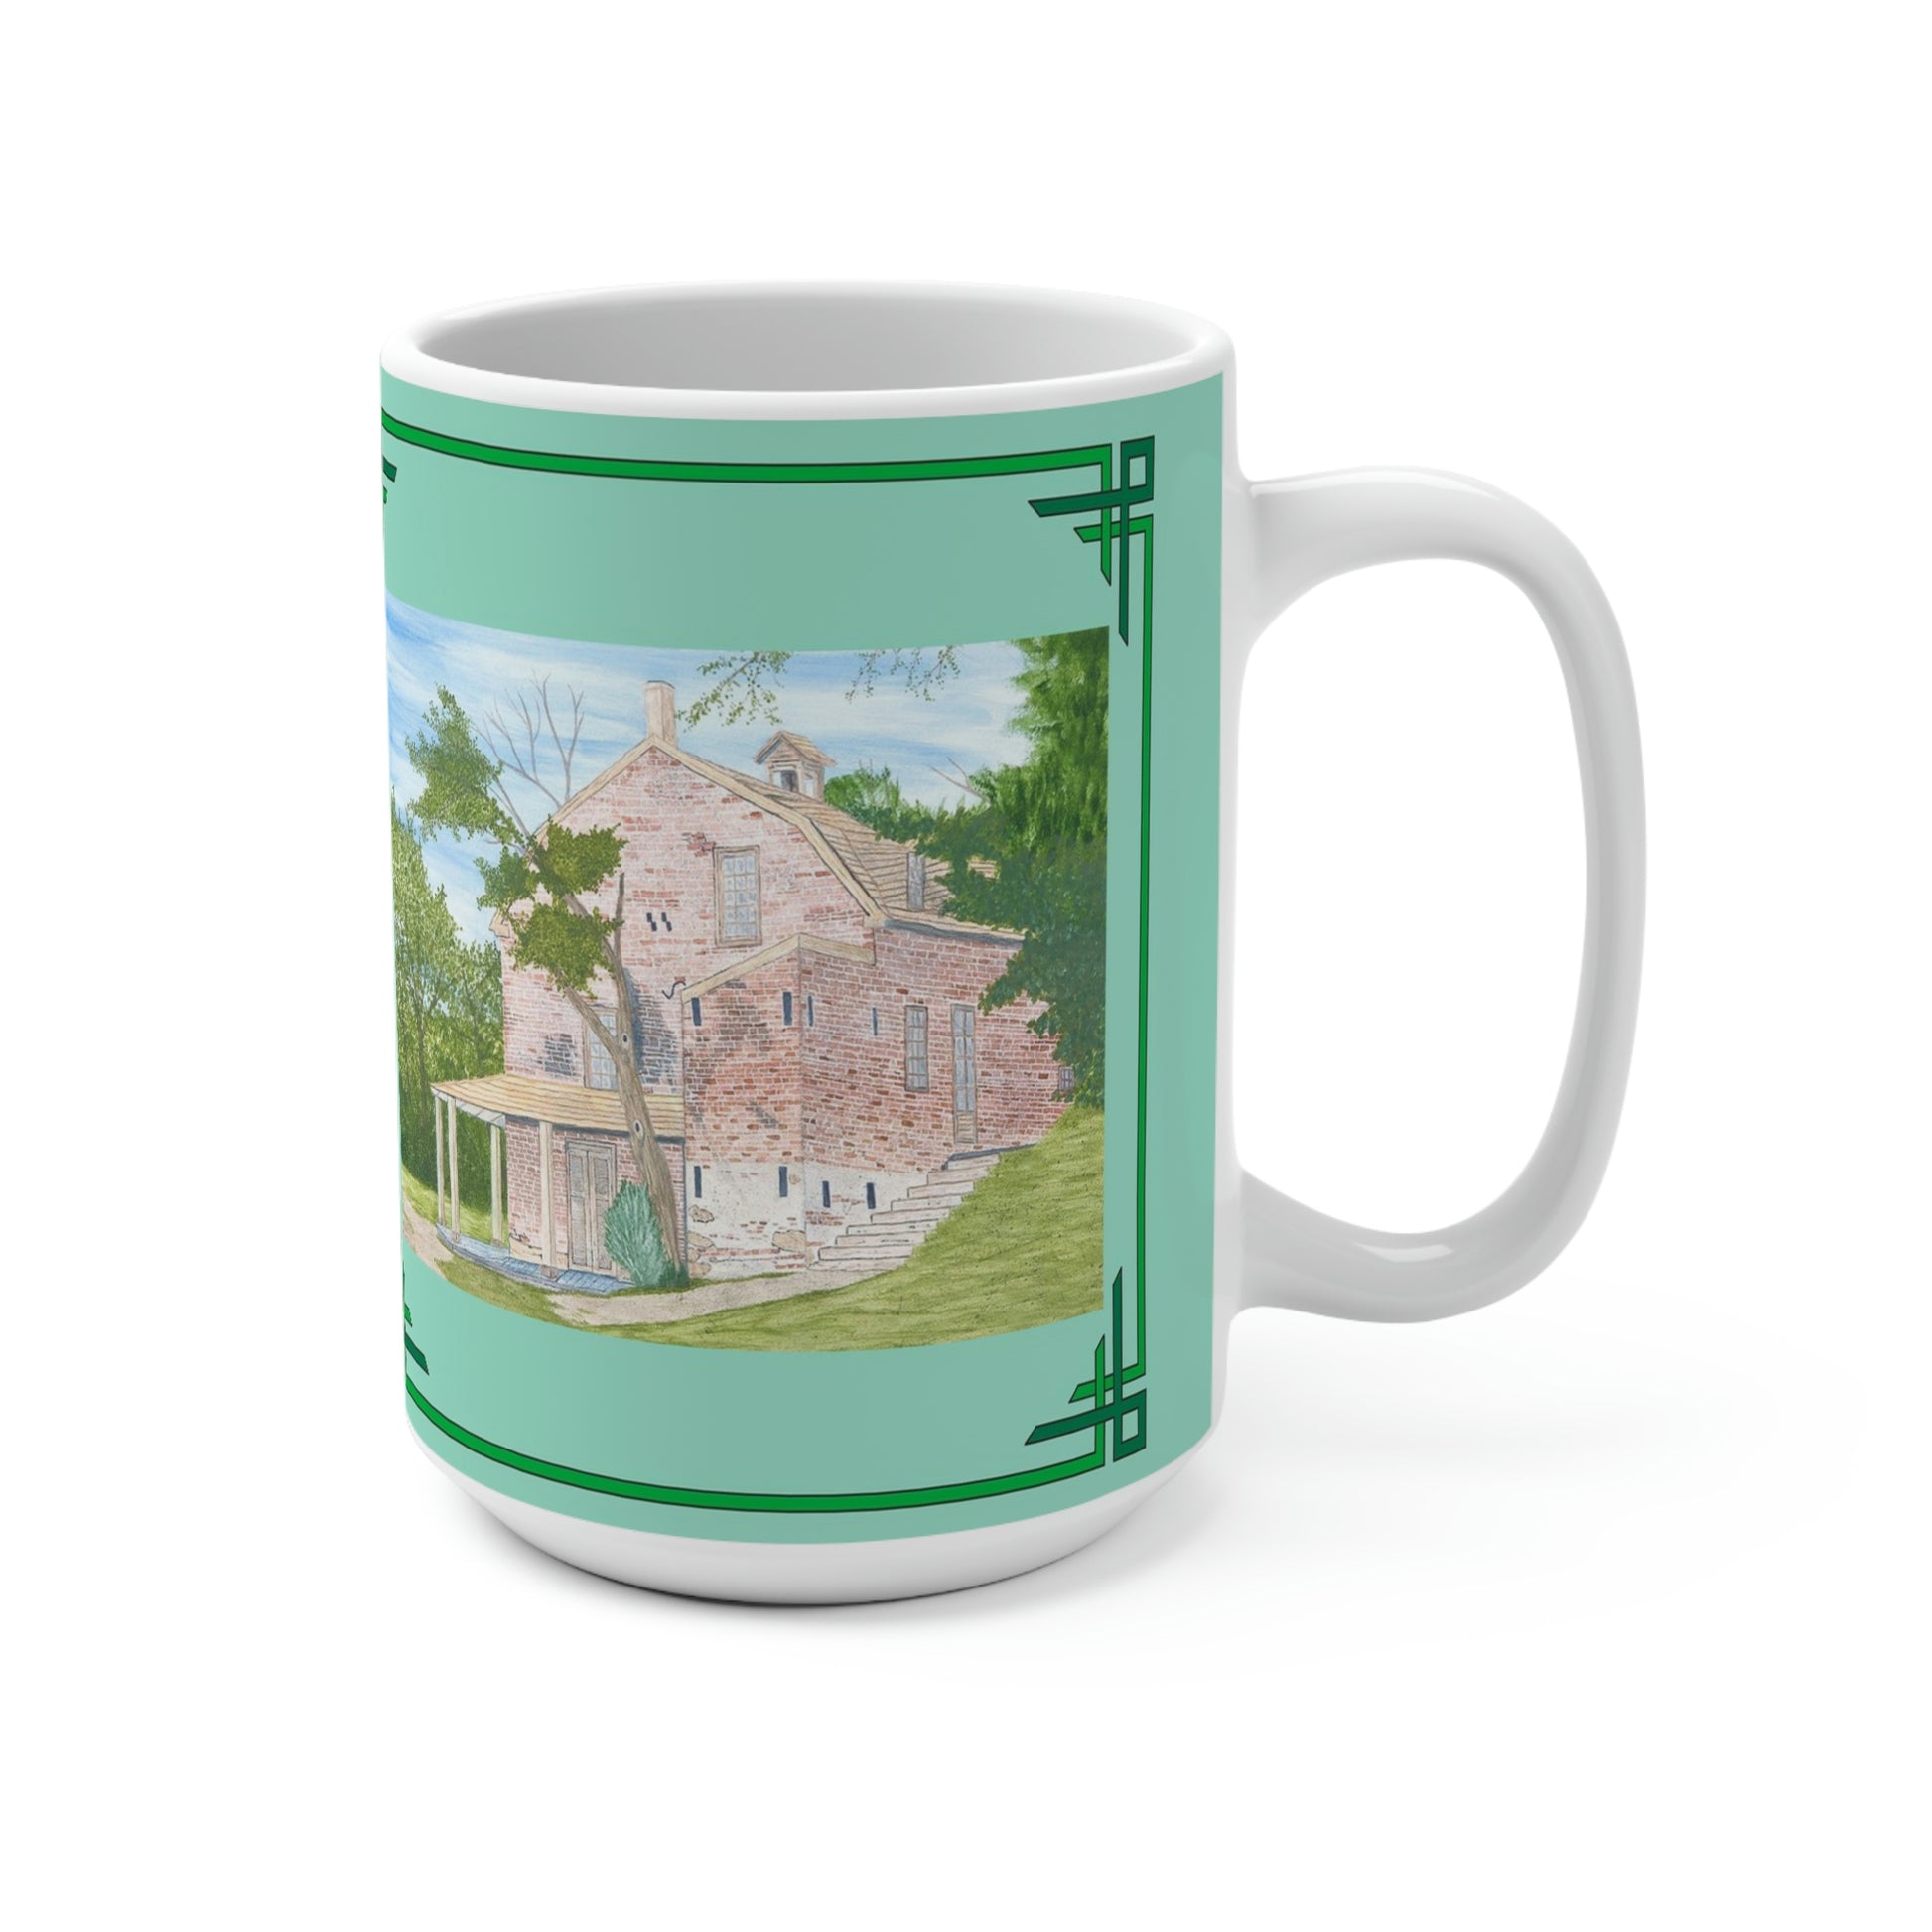 The General Store in New Jersey’s Basto Village State Park recalls a bygone day when the general store was the center of community activity. Enjoy a cup of Coffee, Tea or Hot Chocolate as you gaze at this delightful scene! The General Store image is framed in Spring green to capture the beauty of the General Store in the freshness of the new season. The mug image is a reproduction of an original watercolor by Lee M. Buchanan.